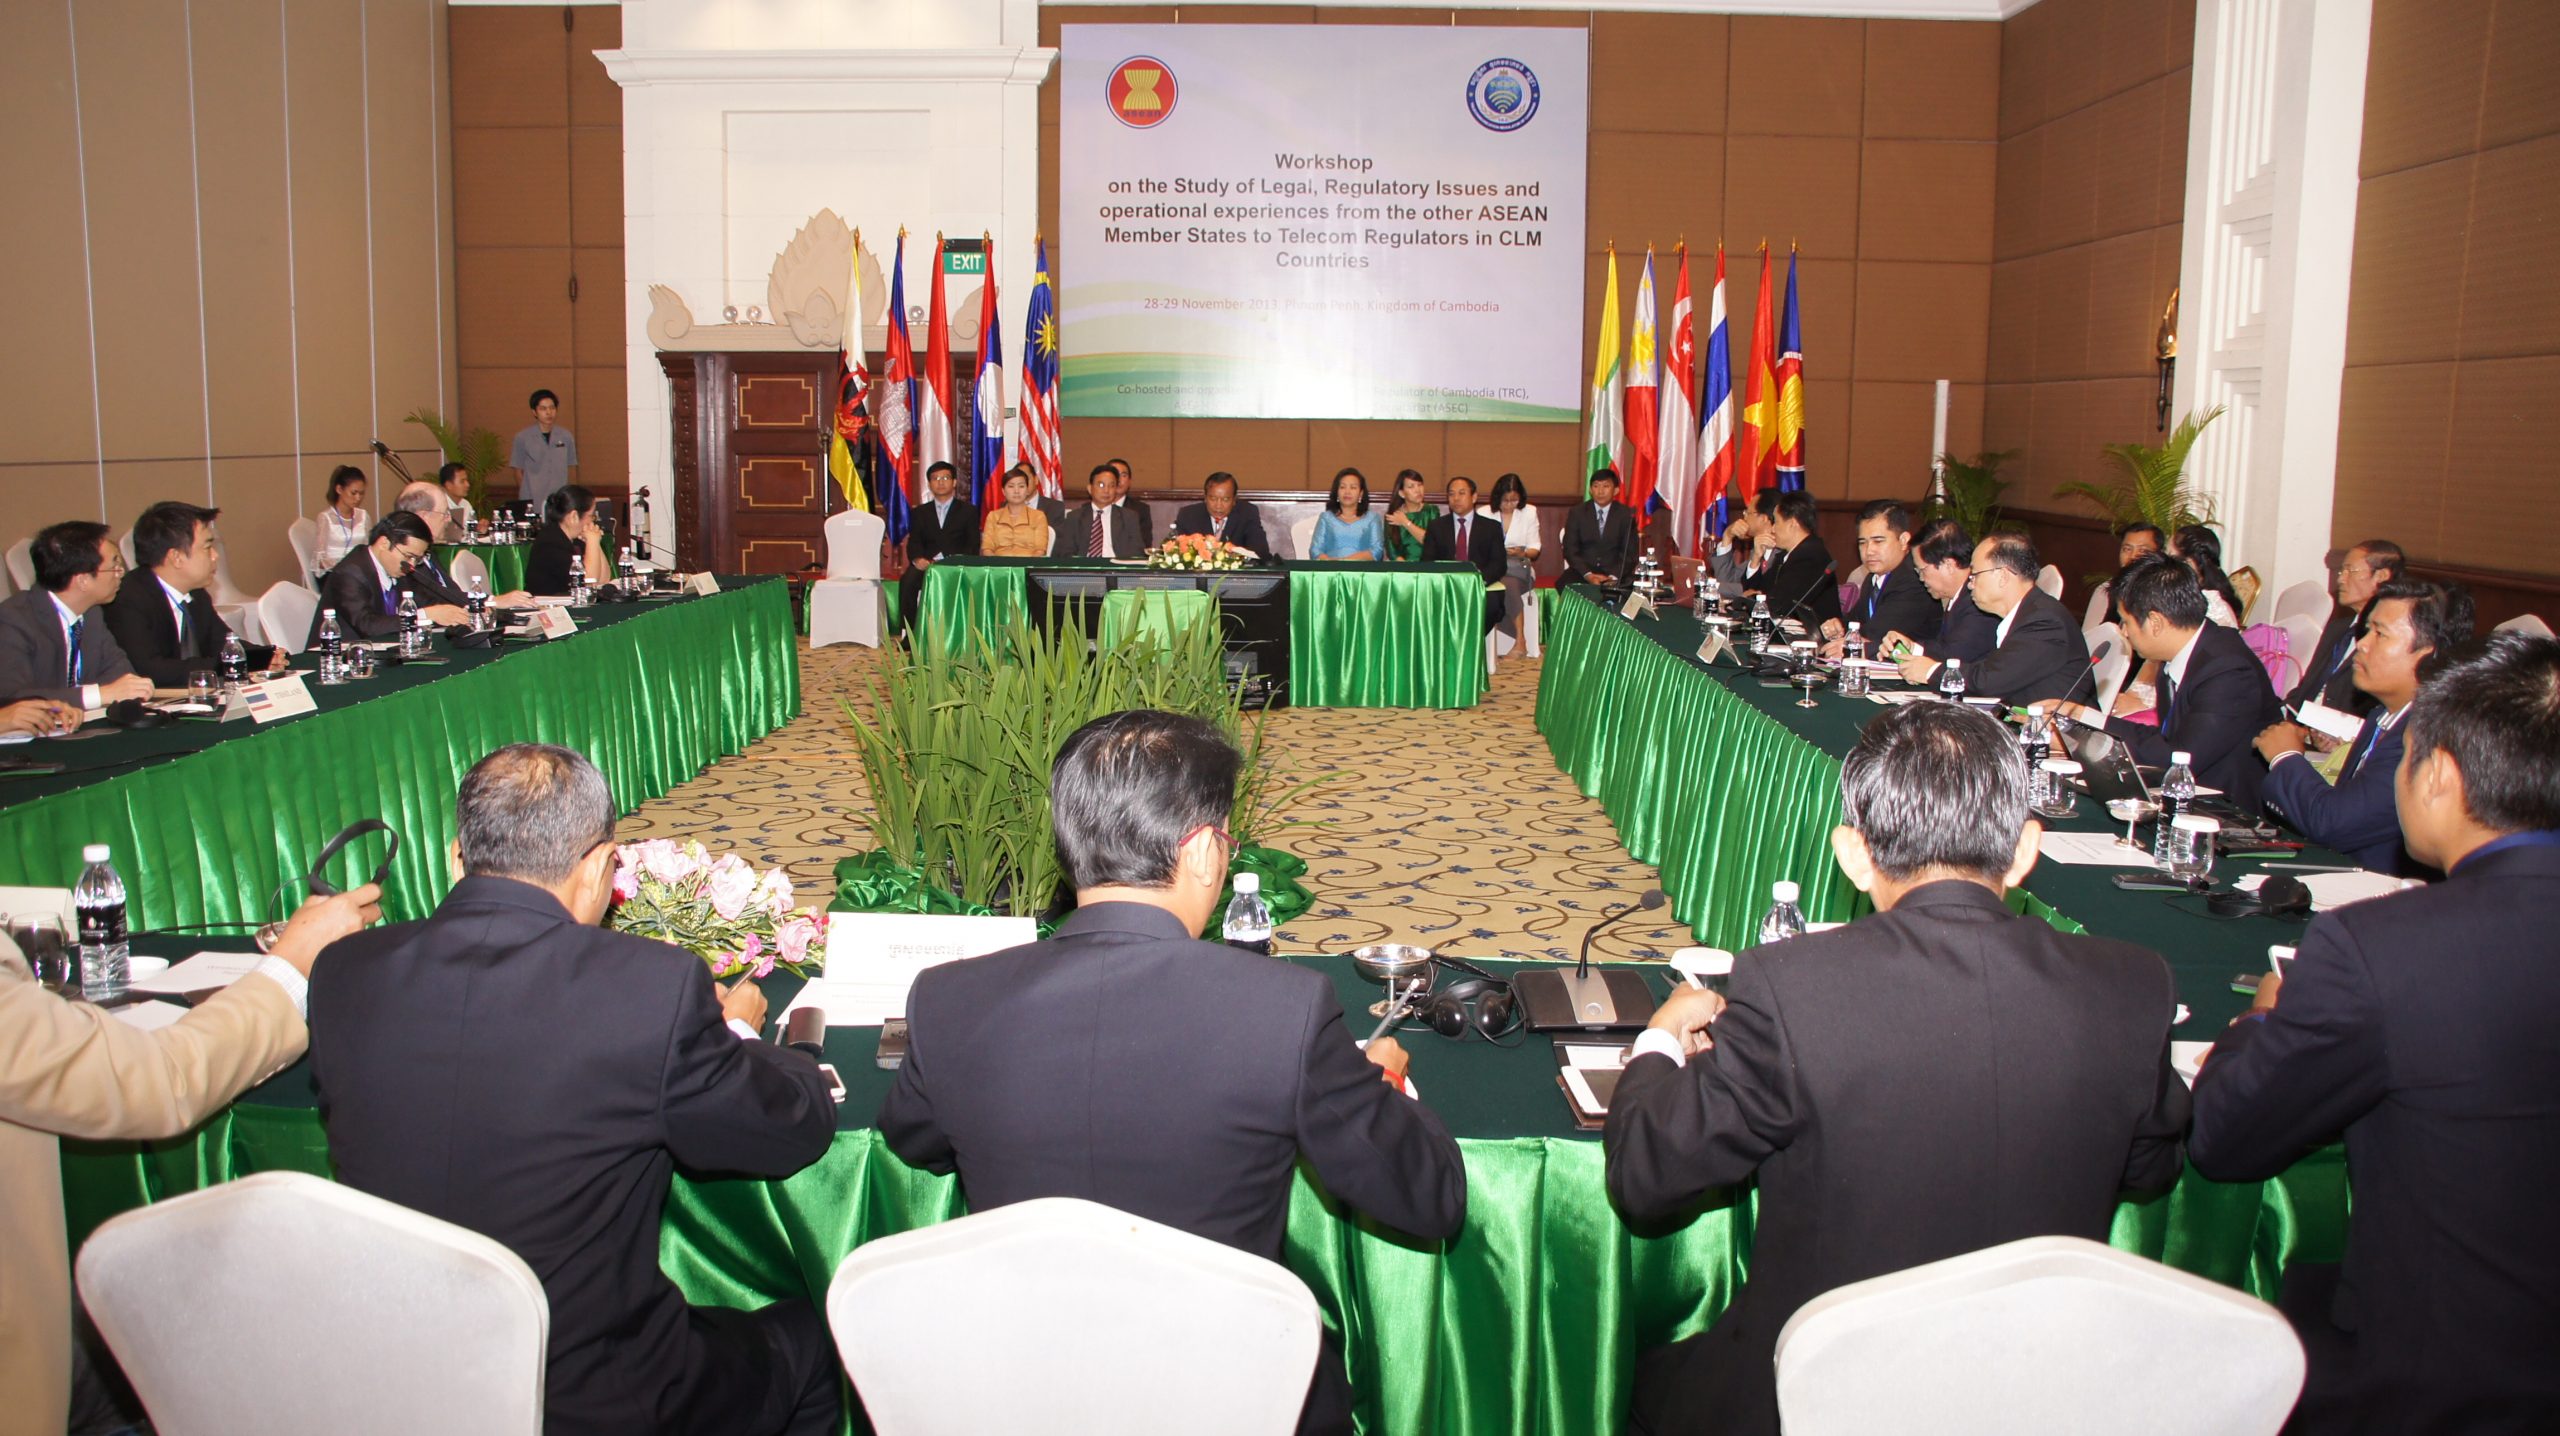 Workshop on the Study of Legal, Regulatory Issues and Operational Experiences from ASEAN Member States